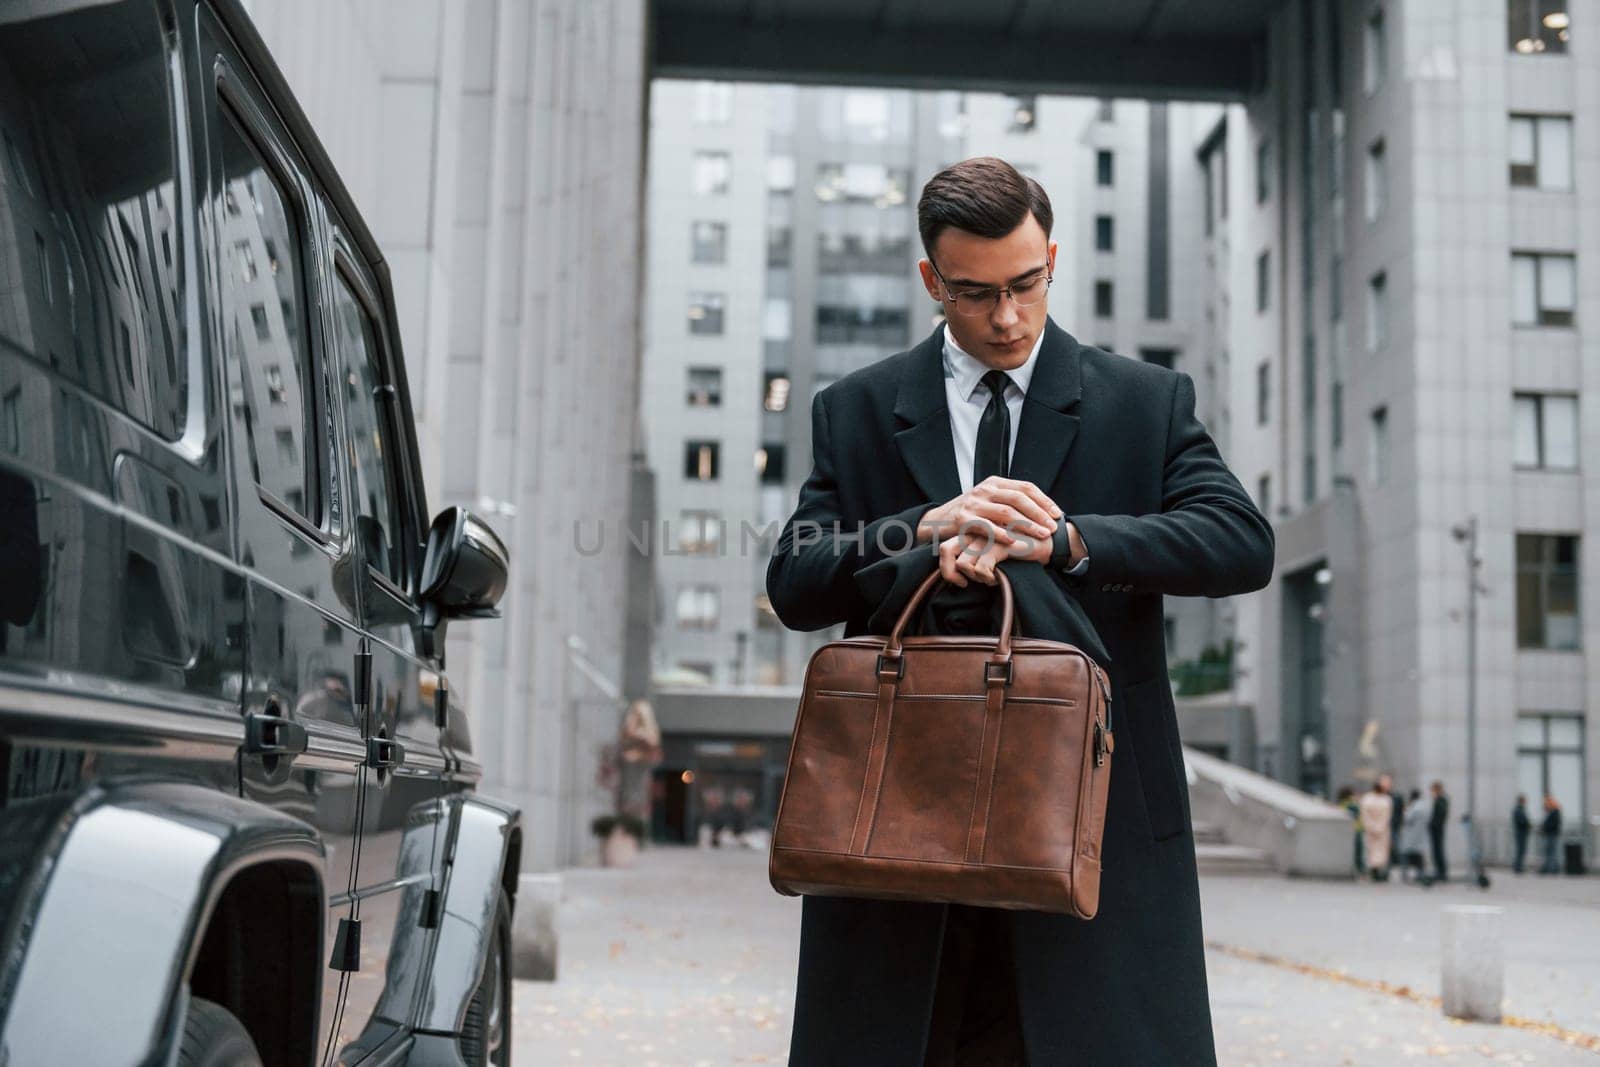 Standing near black car. Businessman in black suit and tie is outdoors in the city.